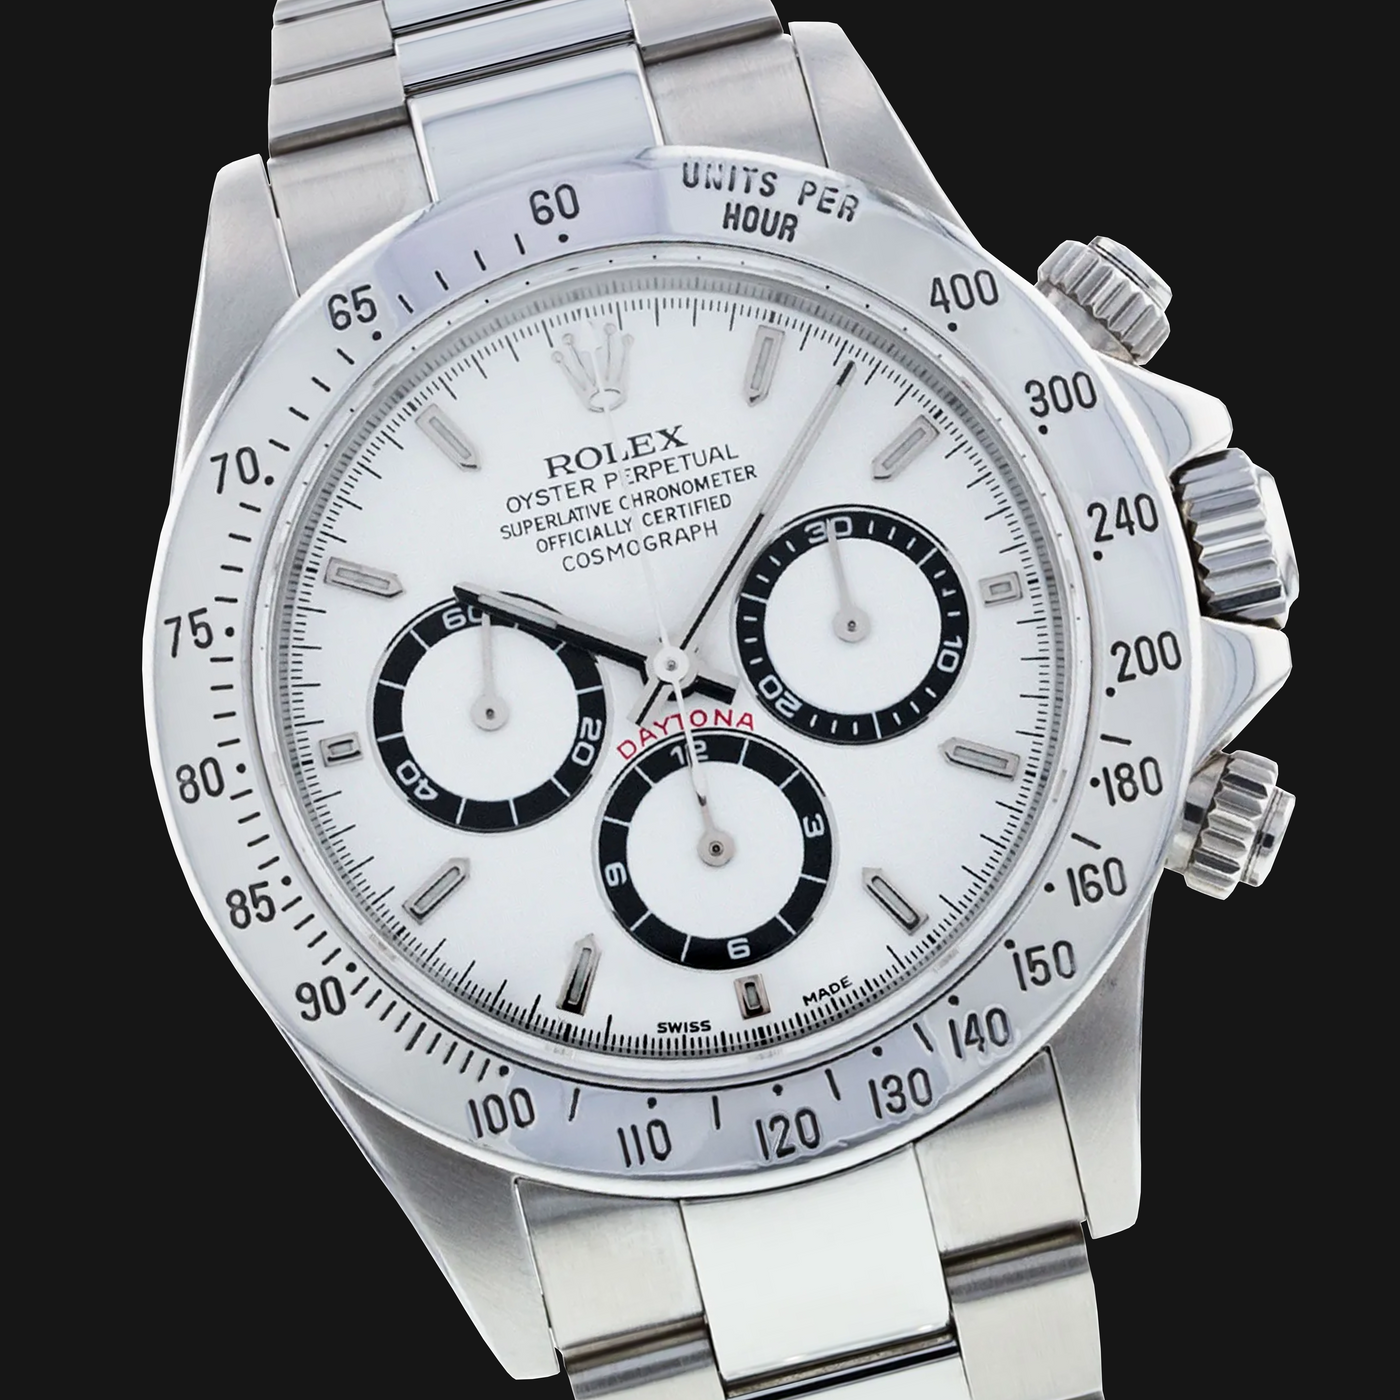 Rolex Daytona 'On the Fly' Extension Link